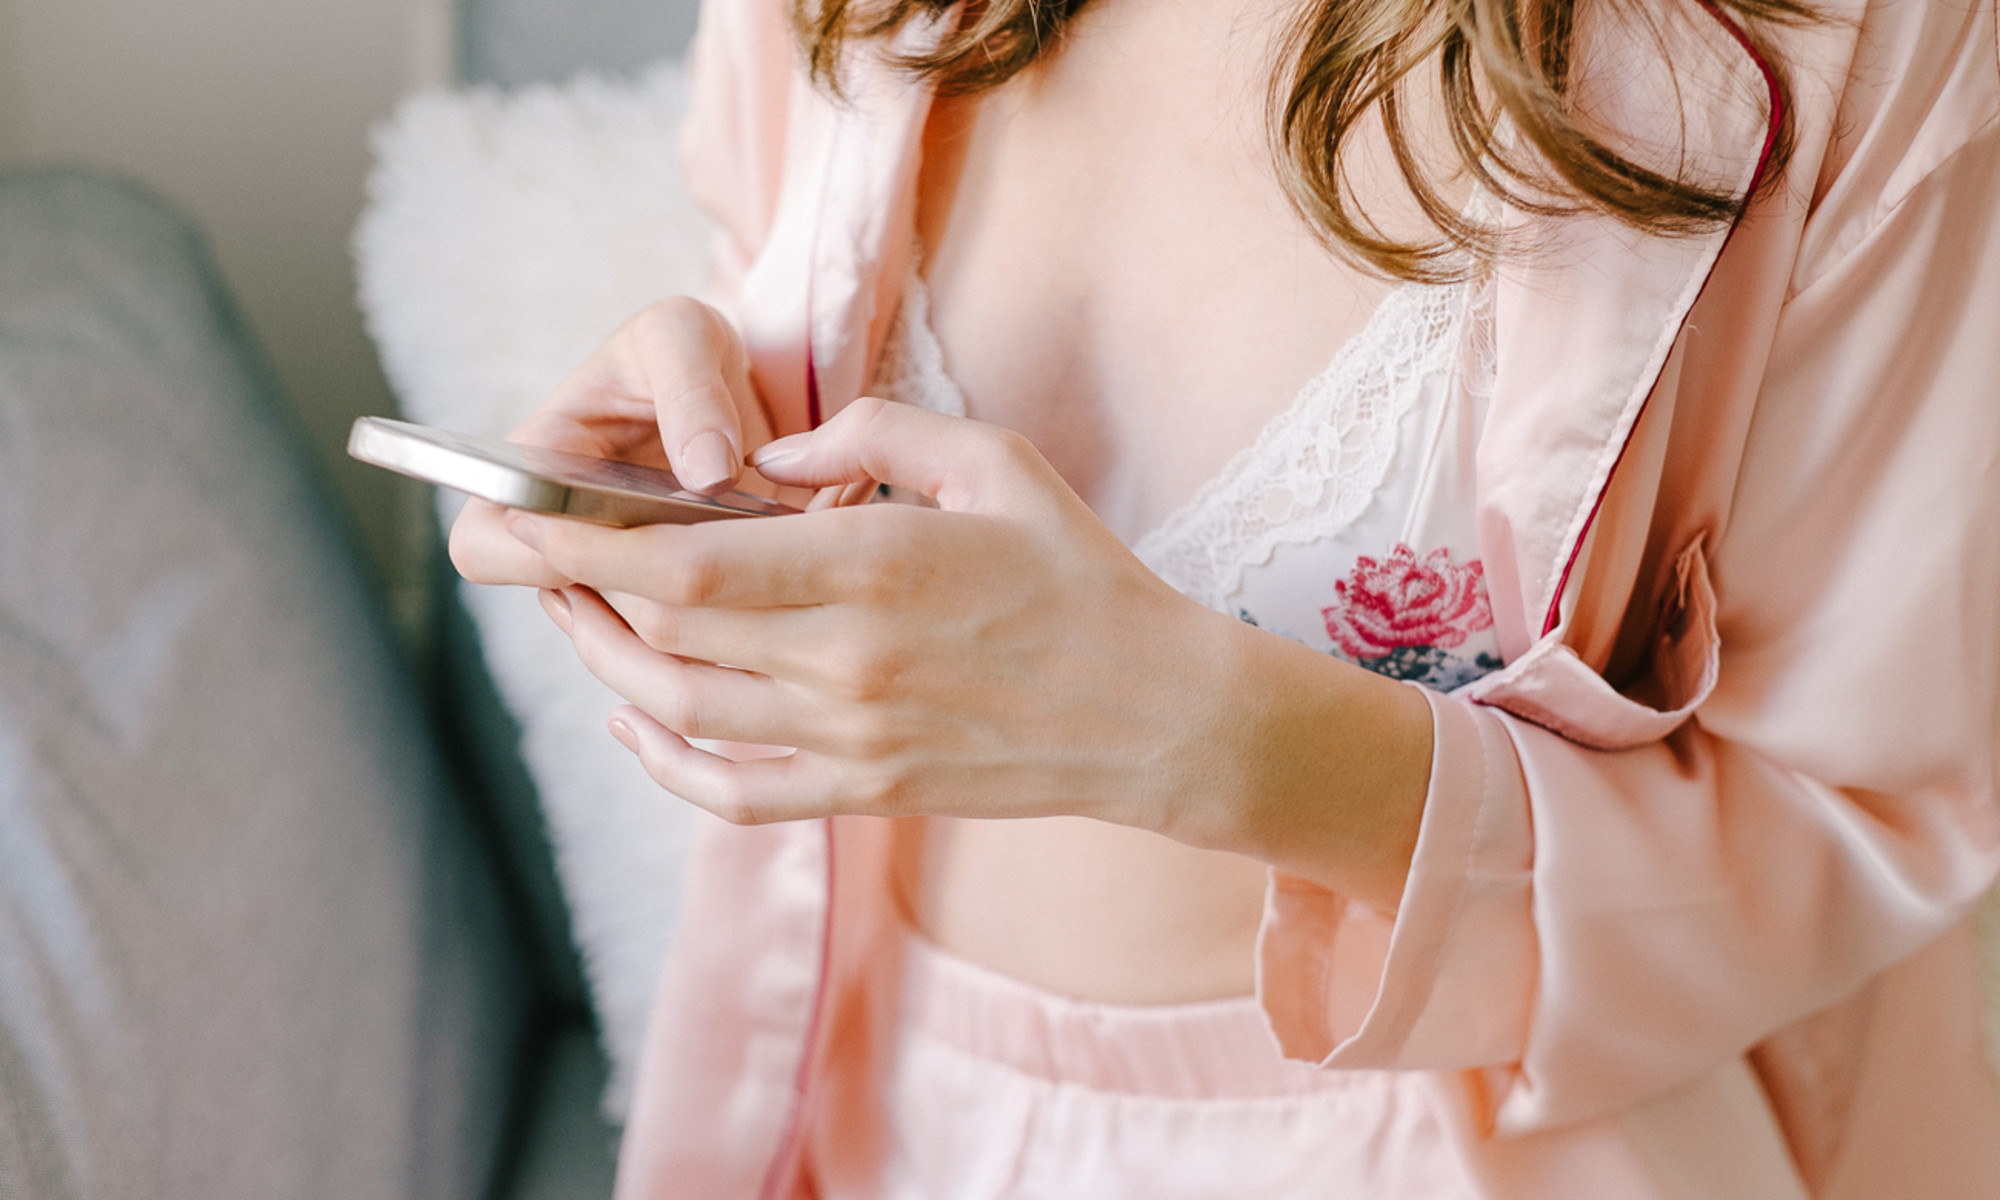 Girl Tied Up And Forced To Have Anal Sex - Good Sexting: 100+ Examples, Responses & Tips | mindbodygreen